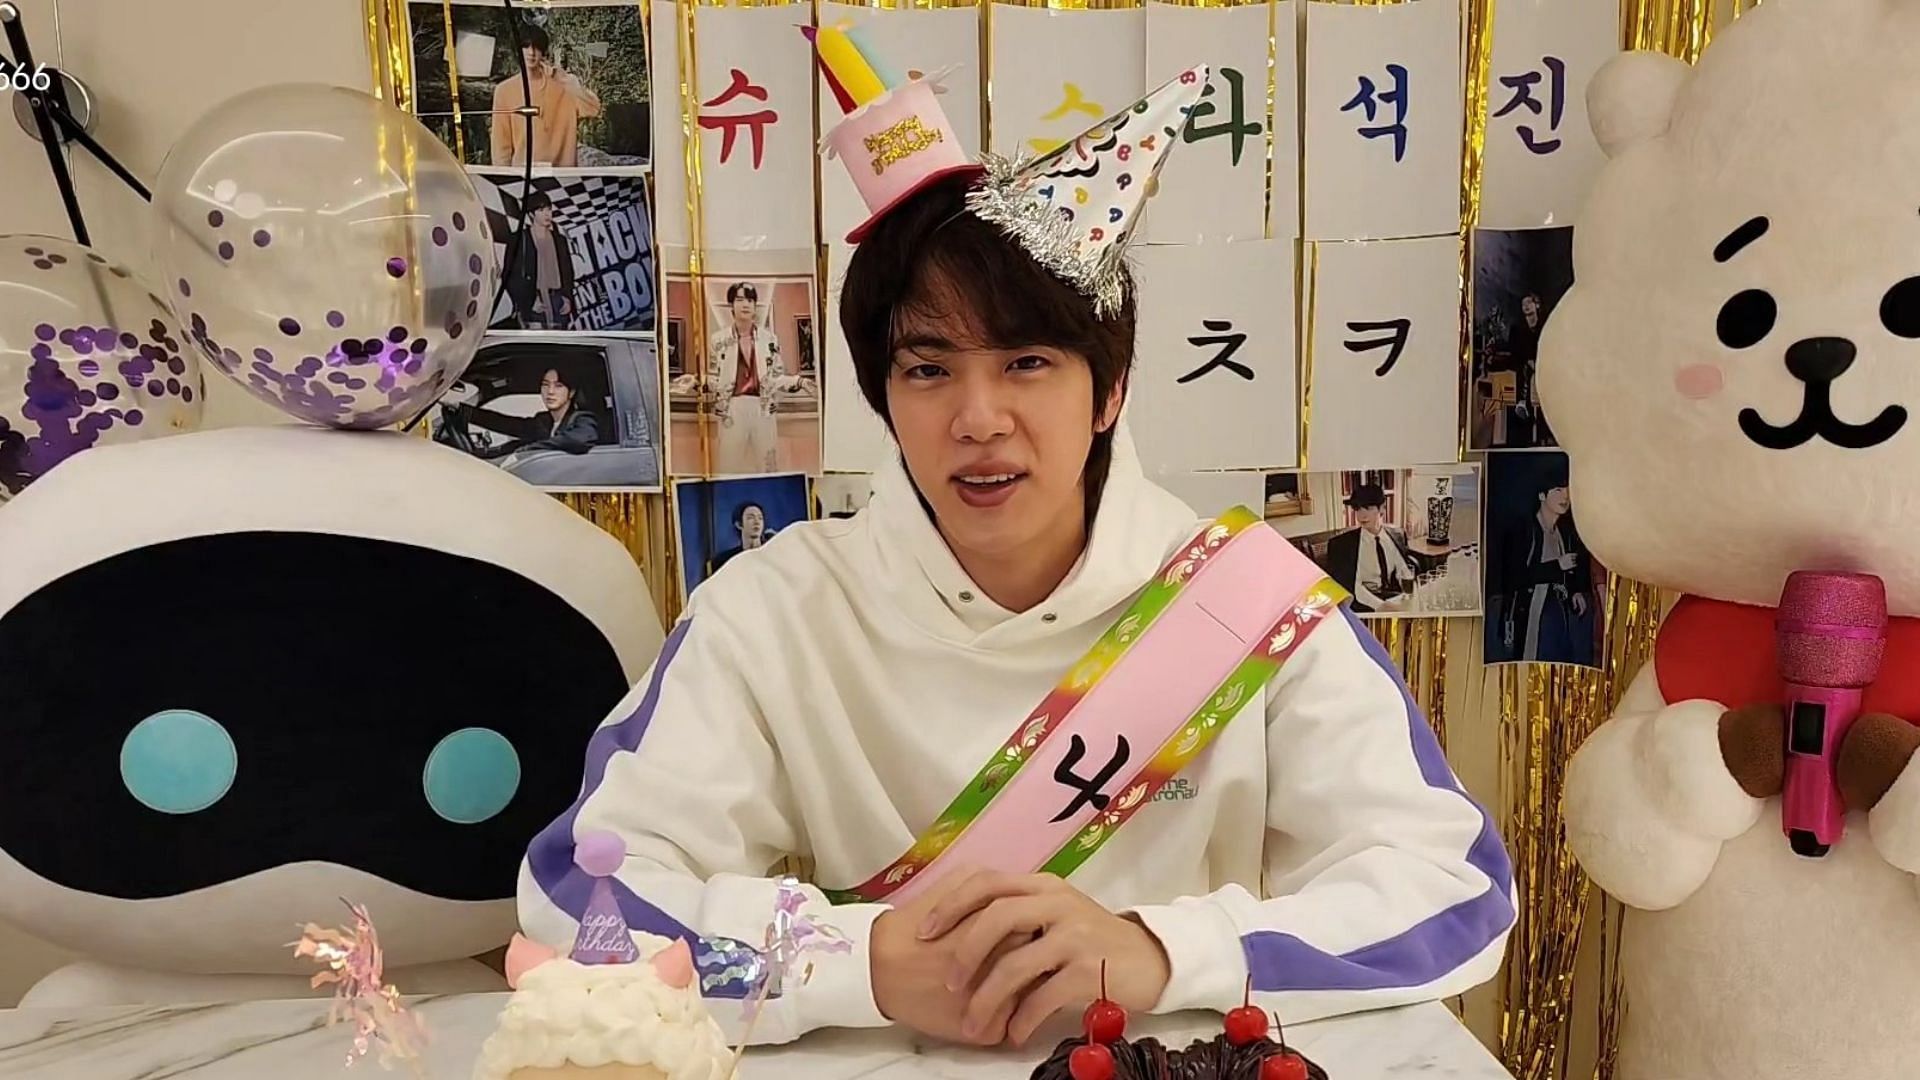 Jin during the Weverse live for his birthday (Image via Twitter/@bangtam_com_ph)